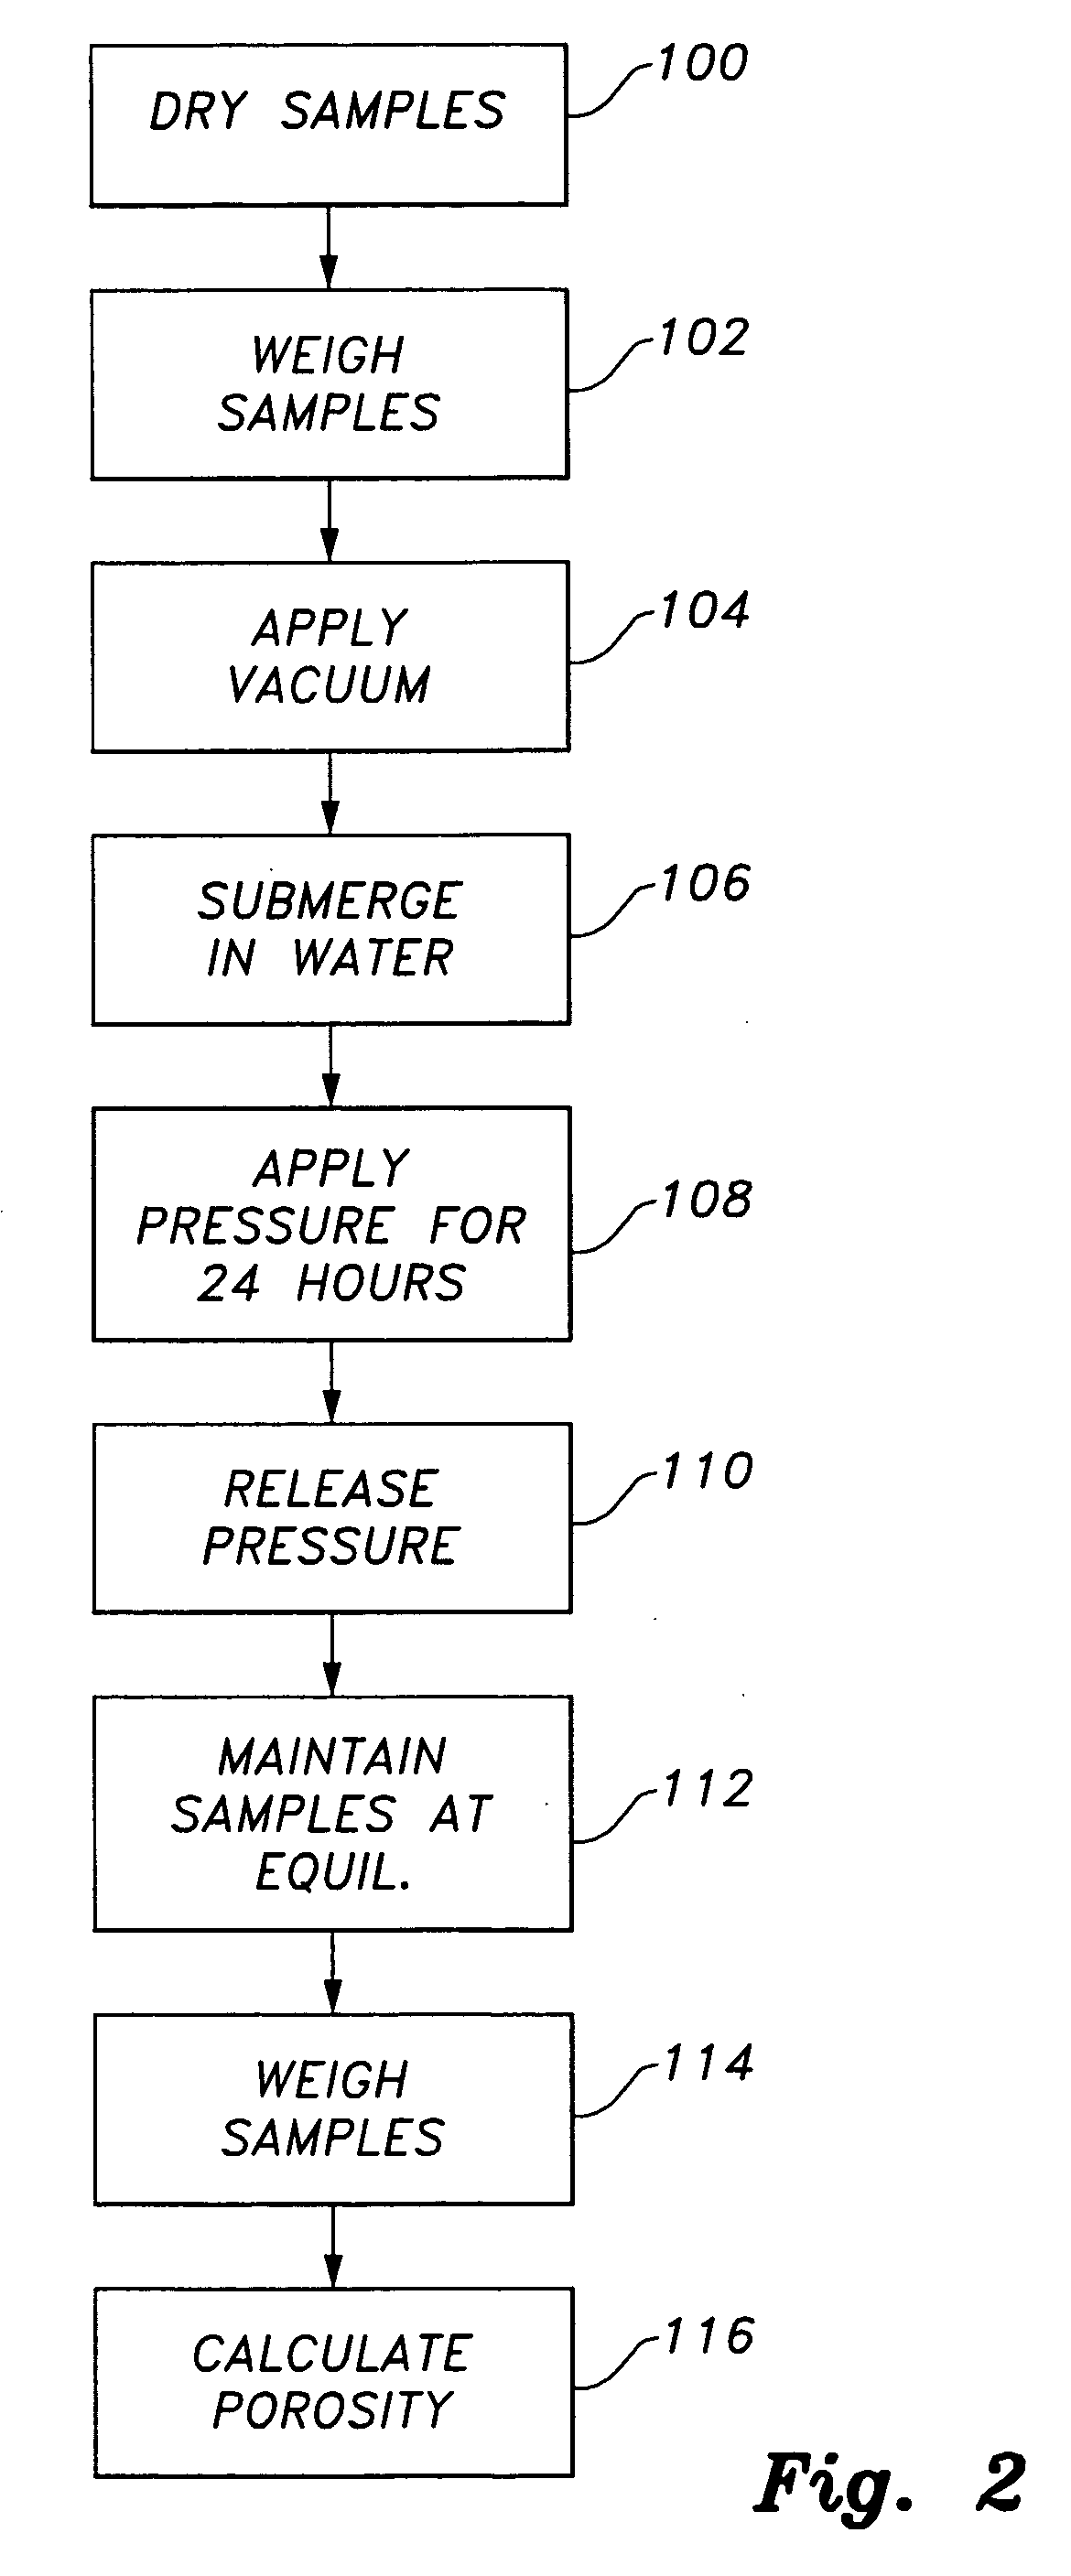 System and method for measuring porosity of high strength and high performance concrete using a vacuum-pressure saturation method